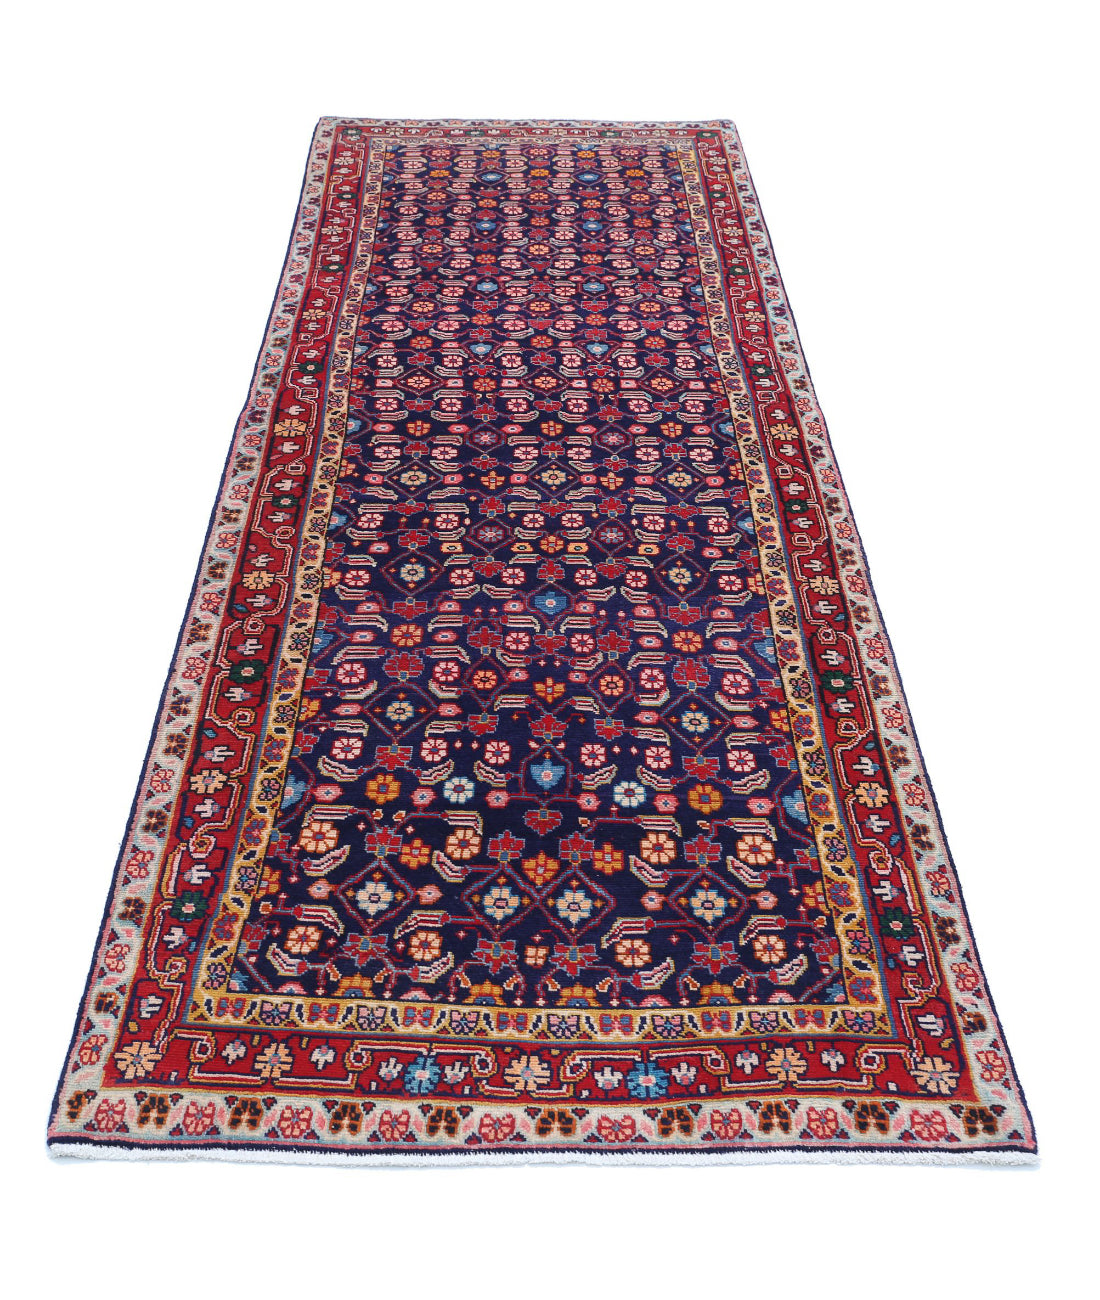 Hamadan 3'4'' X 9'9'' Hand-Knotted Wool Rug 3'4'' x 9'9'' (100 X 293) / Blue / Red